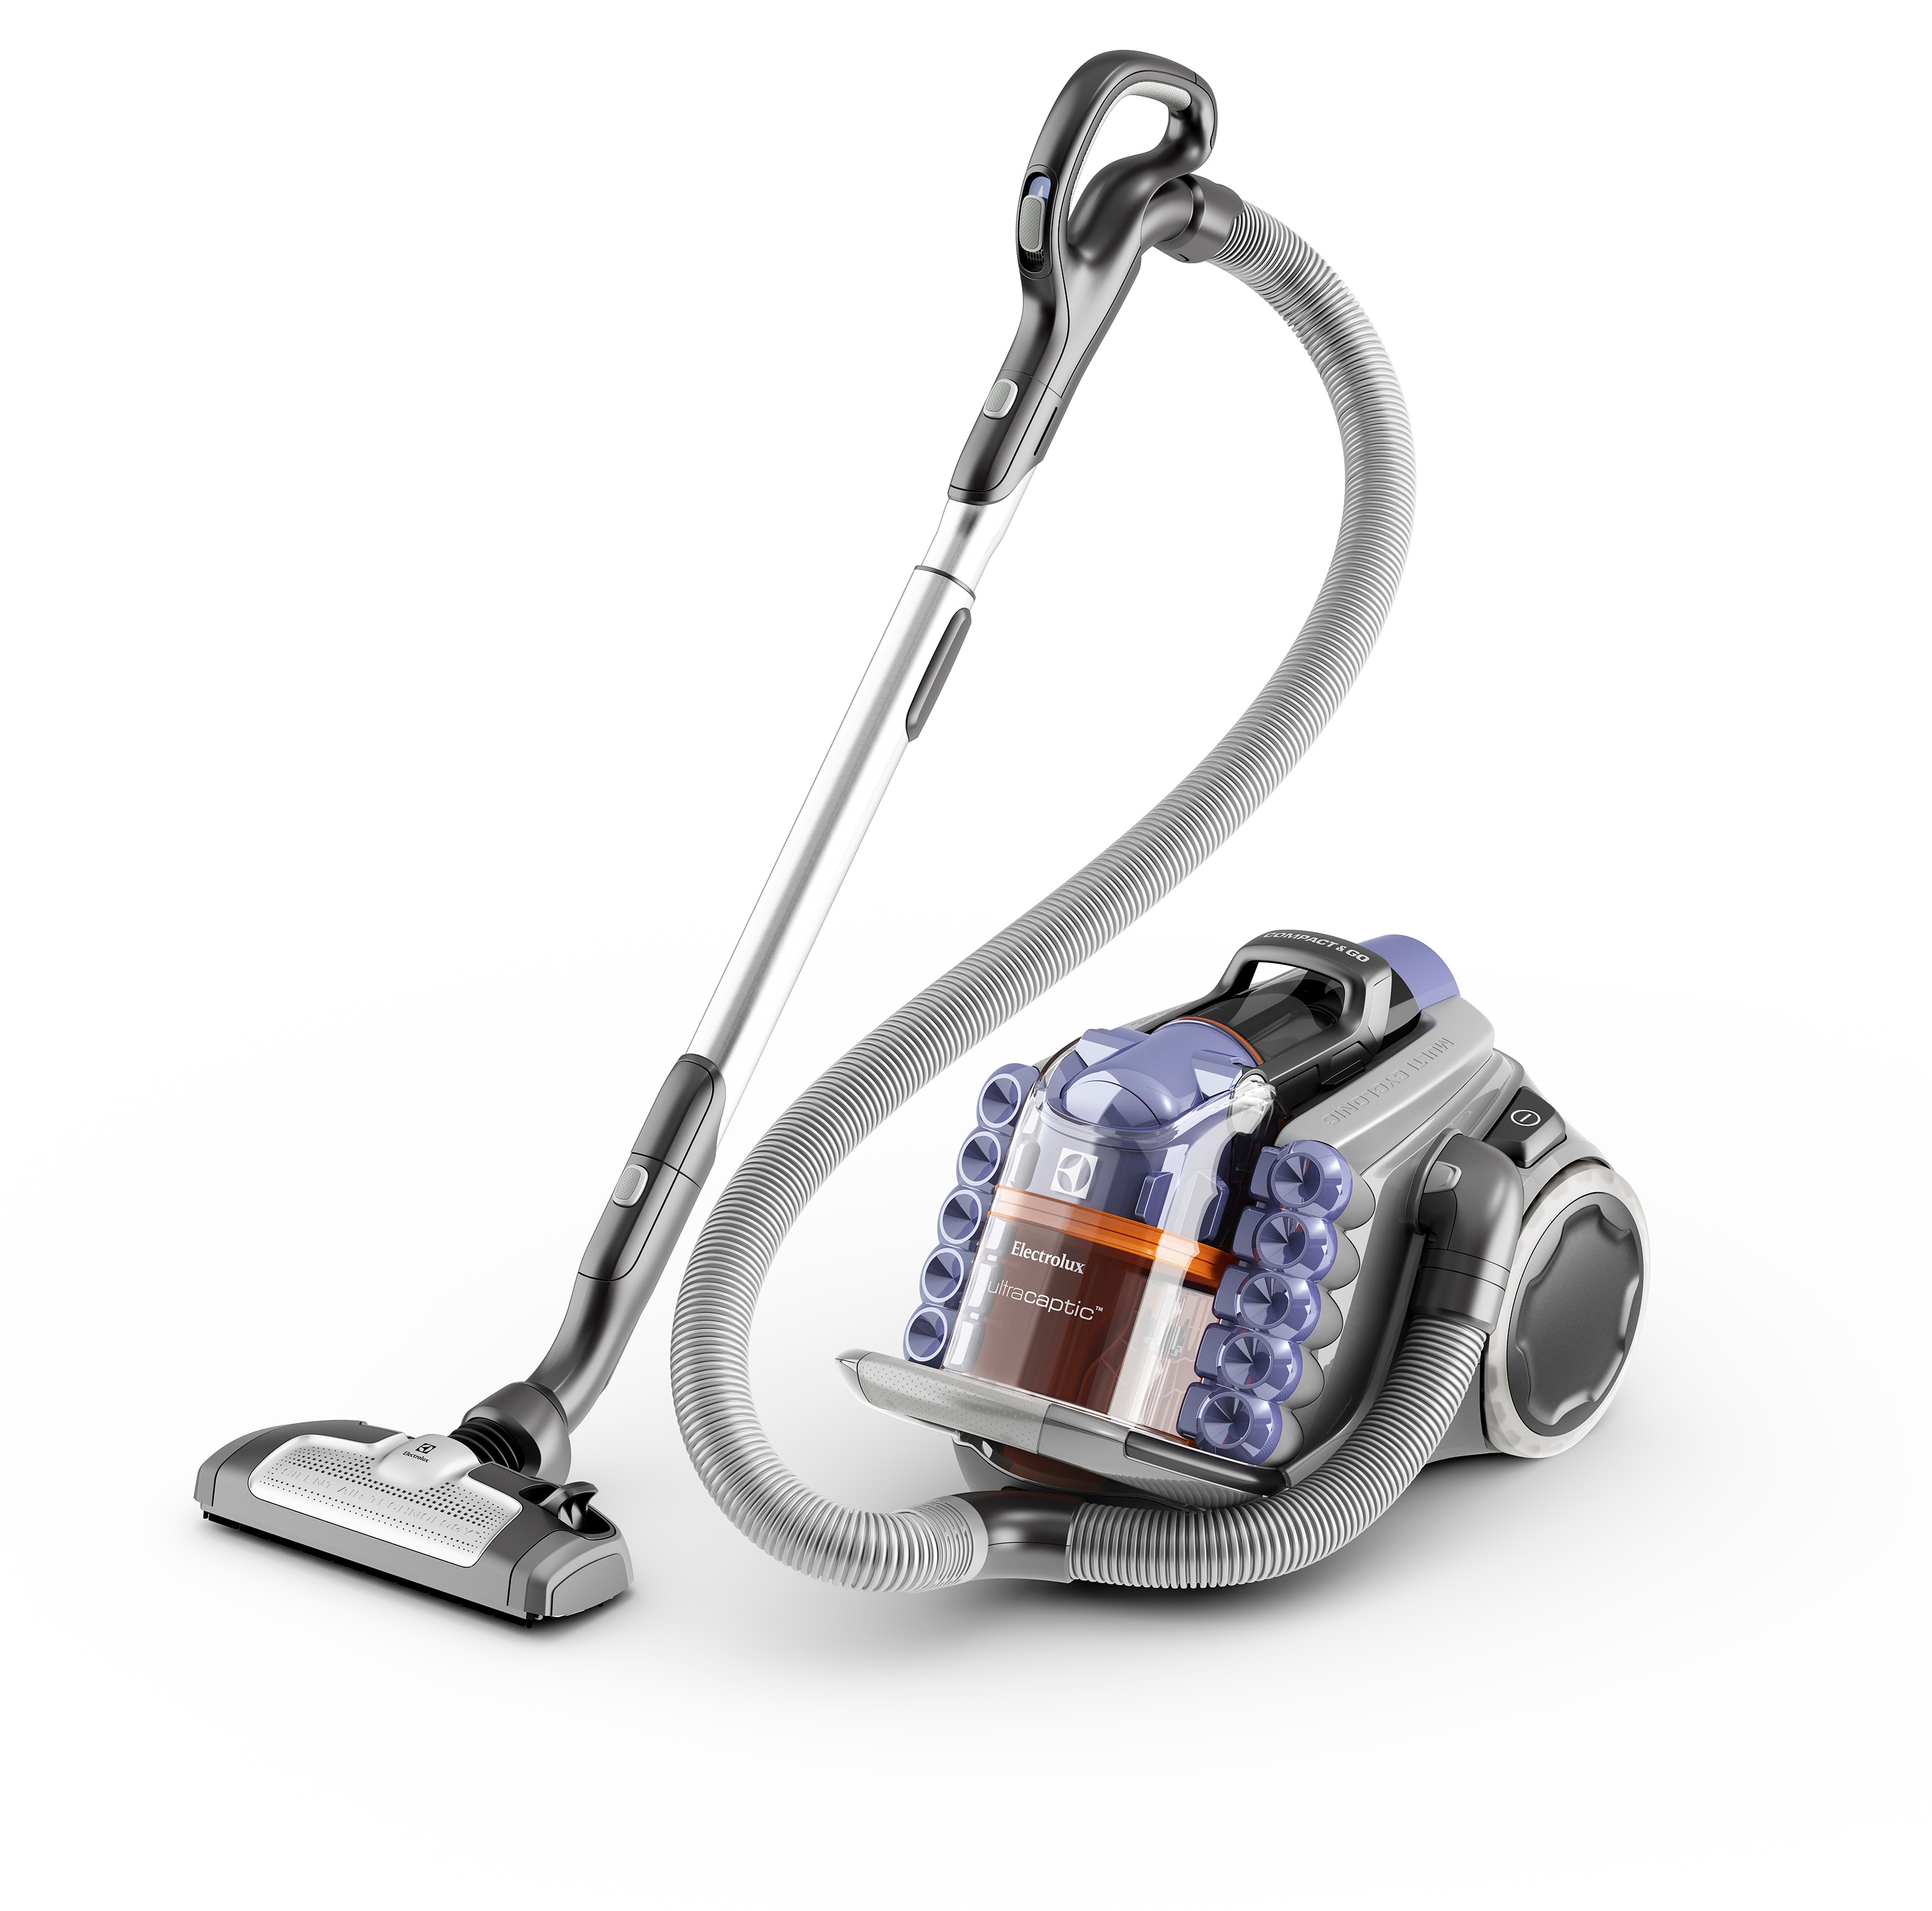 Electrolux launches pioneering innovation in the bagless vacuum cleaner ...